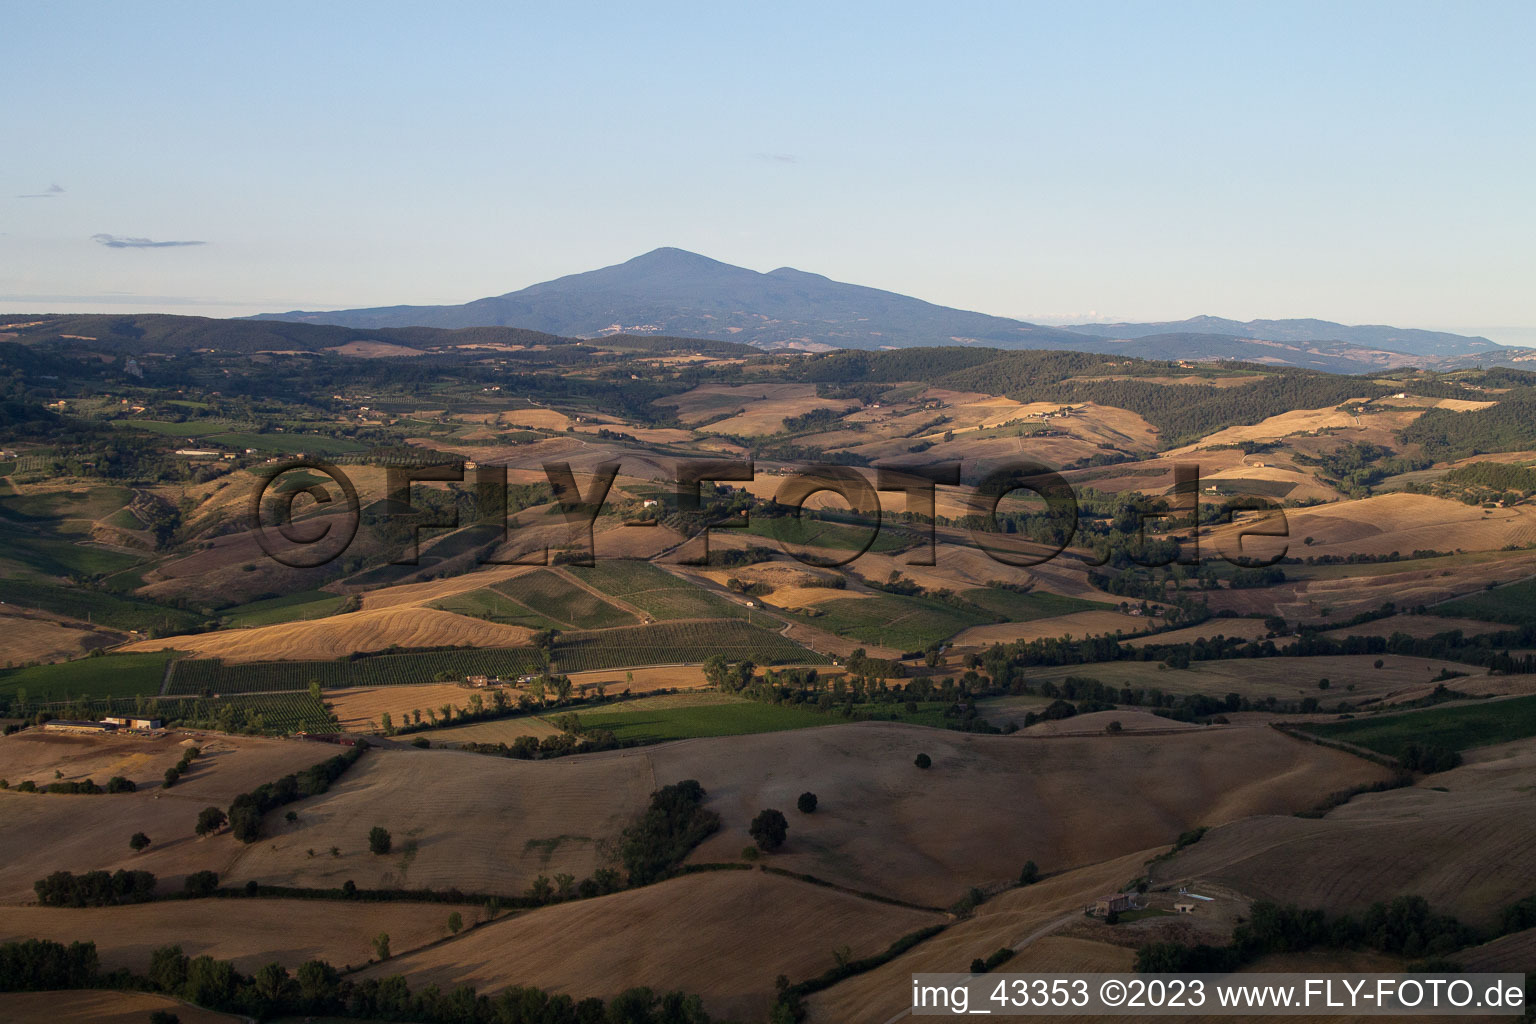 Aerial view of La Pievaccia in the state Tuscany, Italy